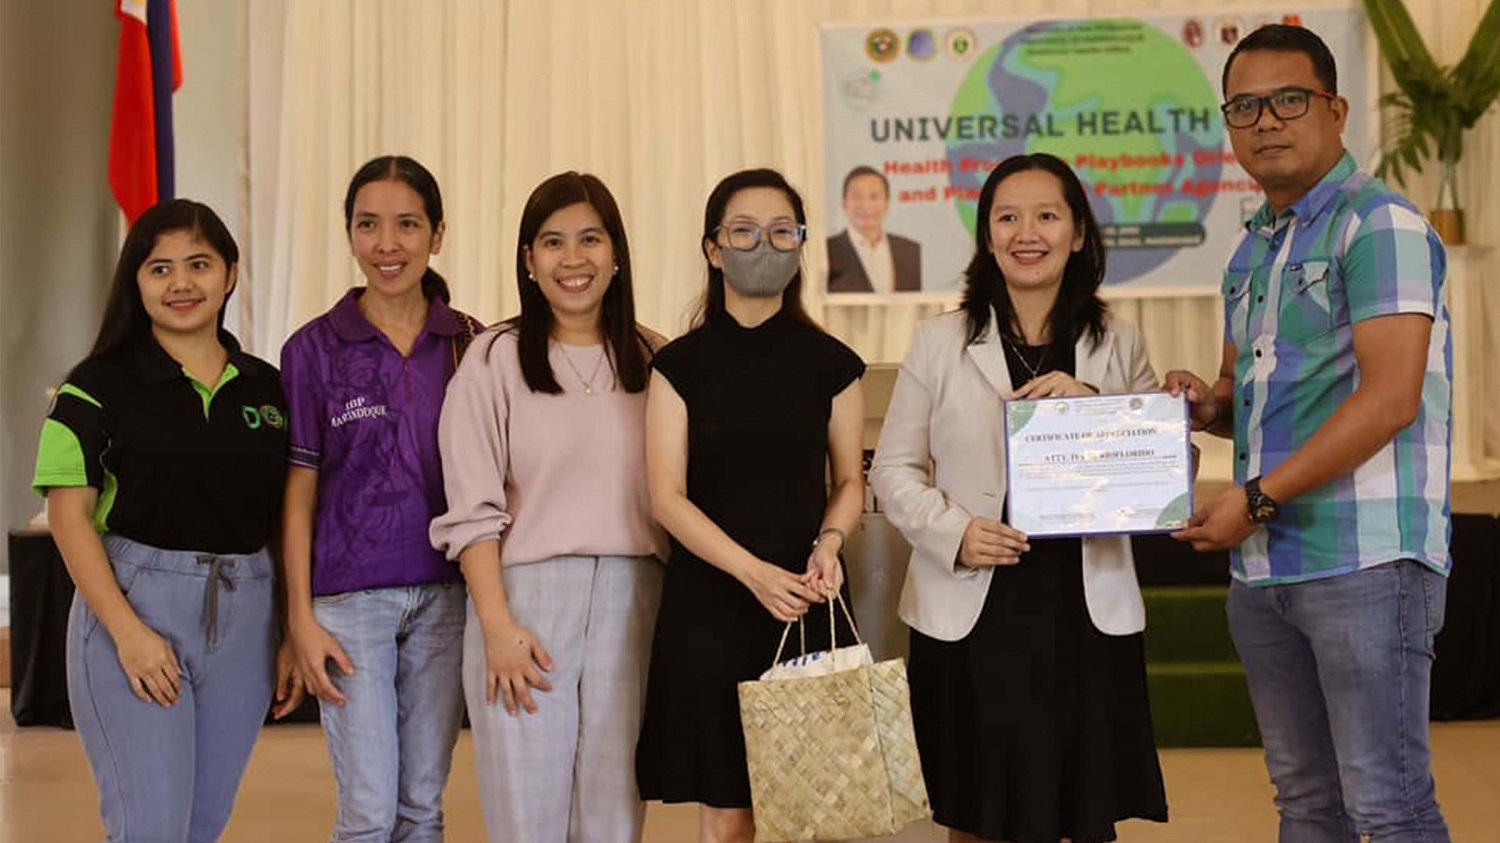 Health promotion playbooks drive health and wellness in Marinduque